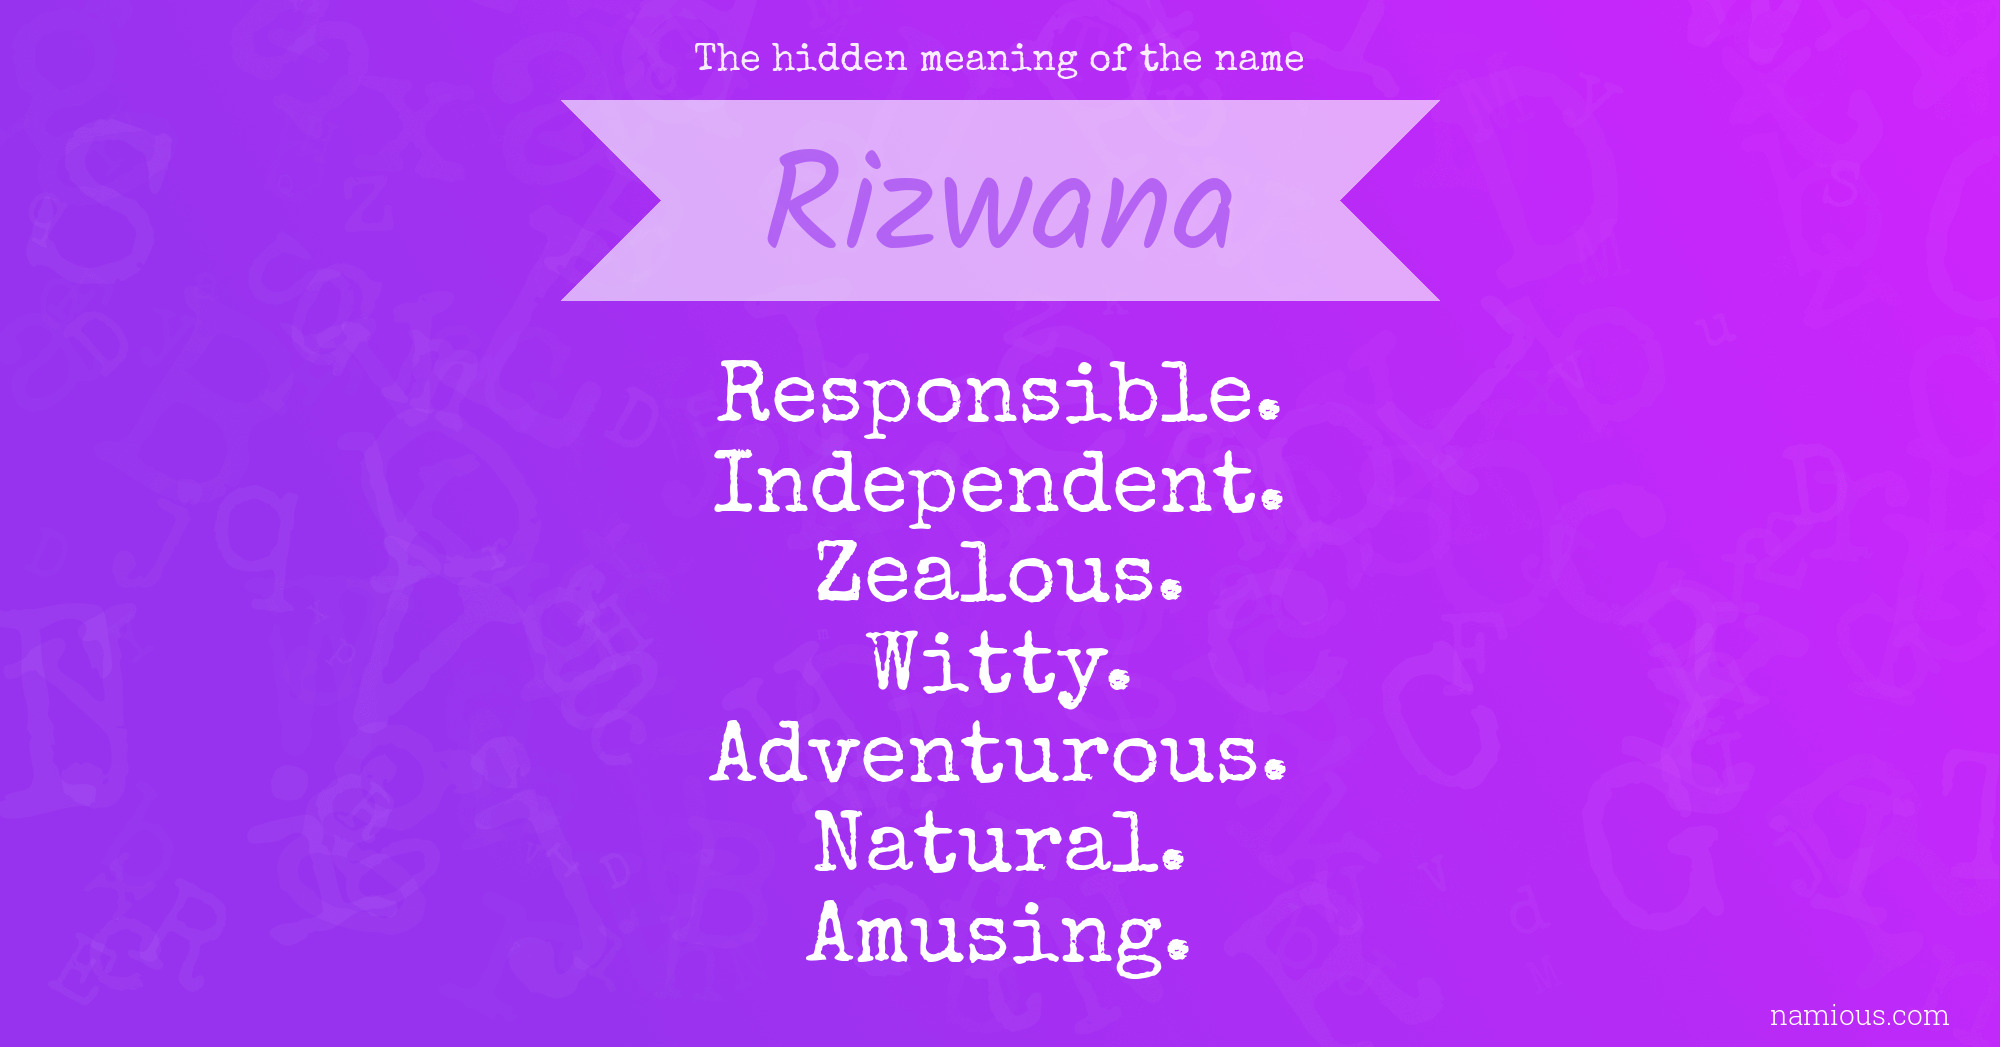 The hidden meaning of the name Rizwana